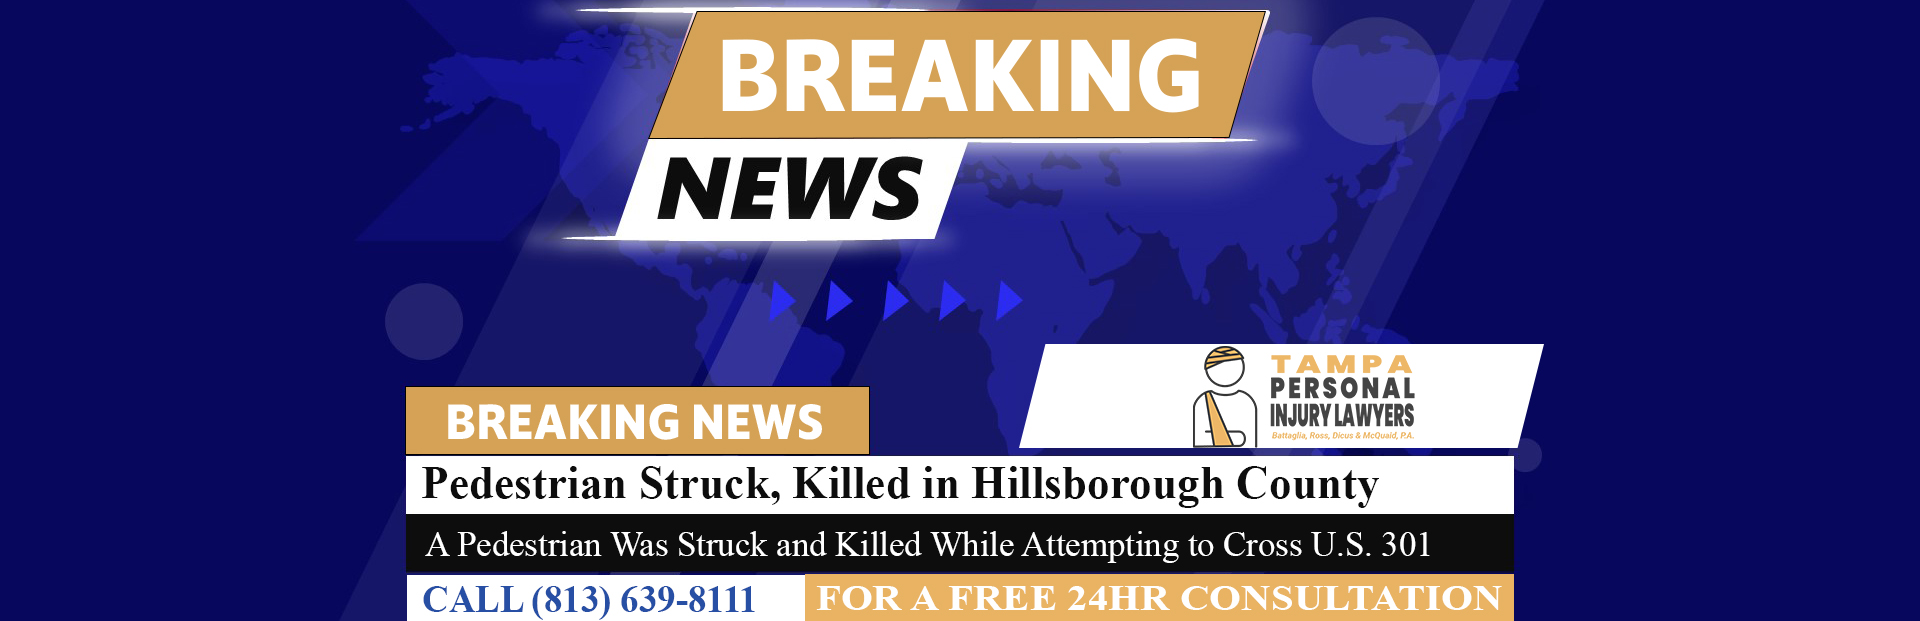 [11-23-23] Pedestrian Struck, Killed While Attempting to Cross US-301 in Hillsborough County